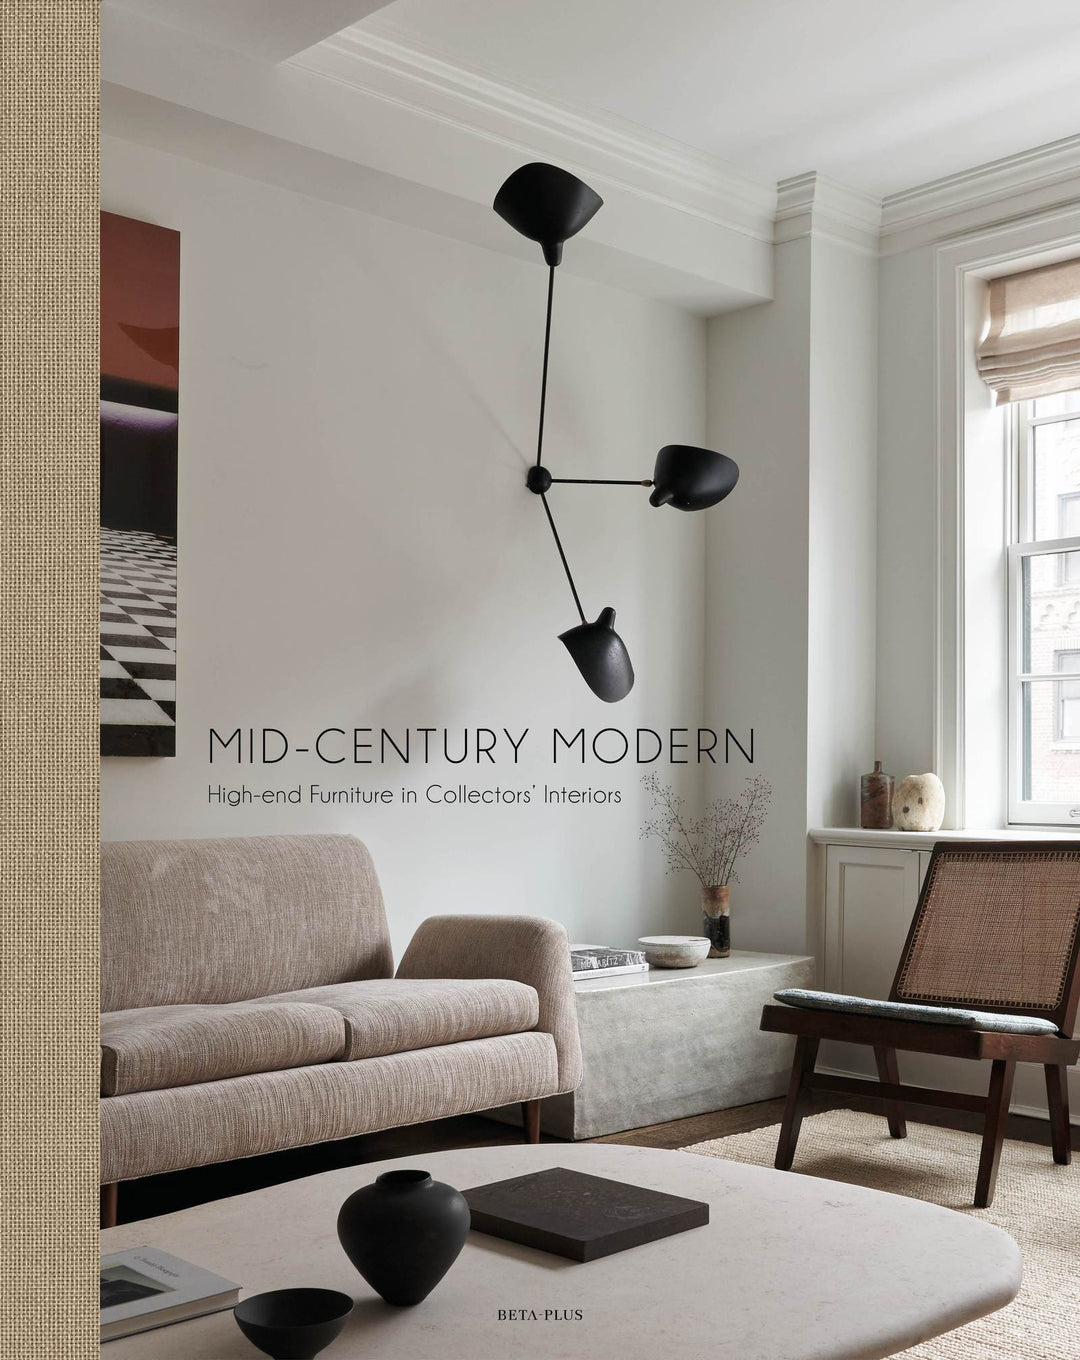 Book Mid-Century Modern - High-End Furniture in Collector's Interiors